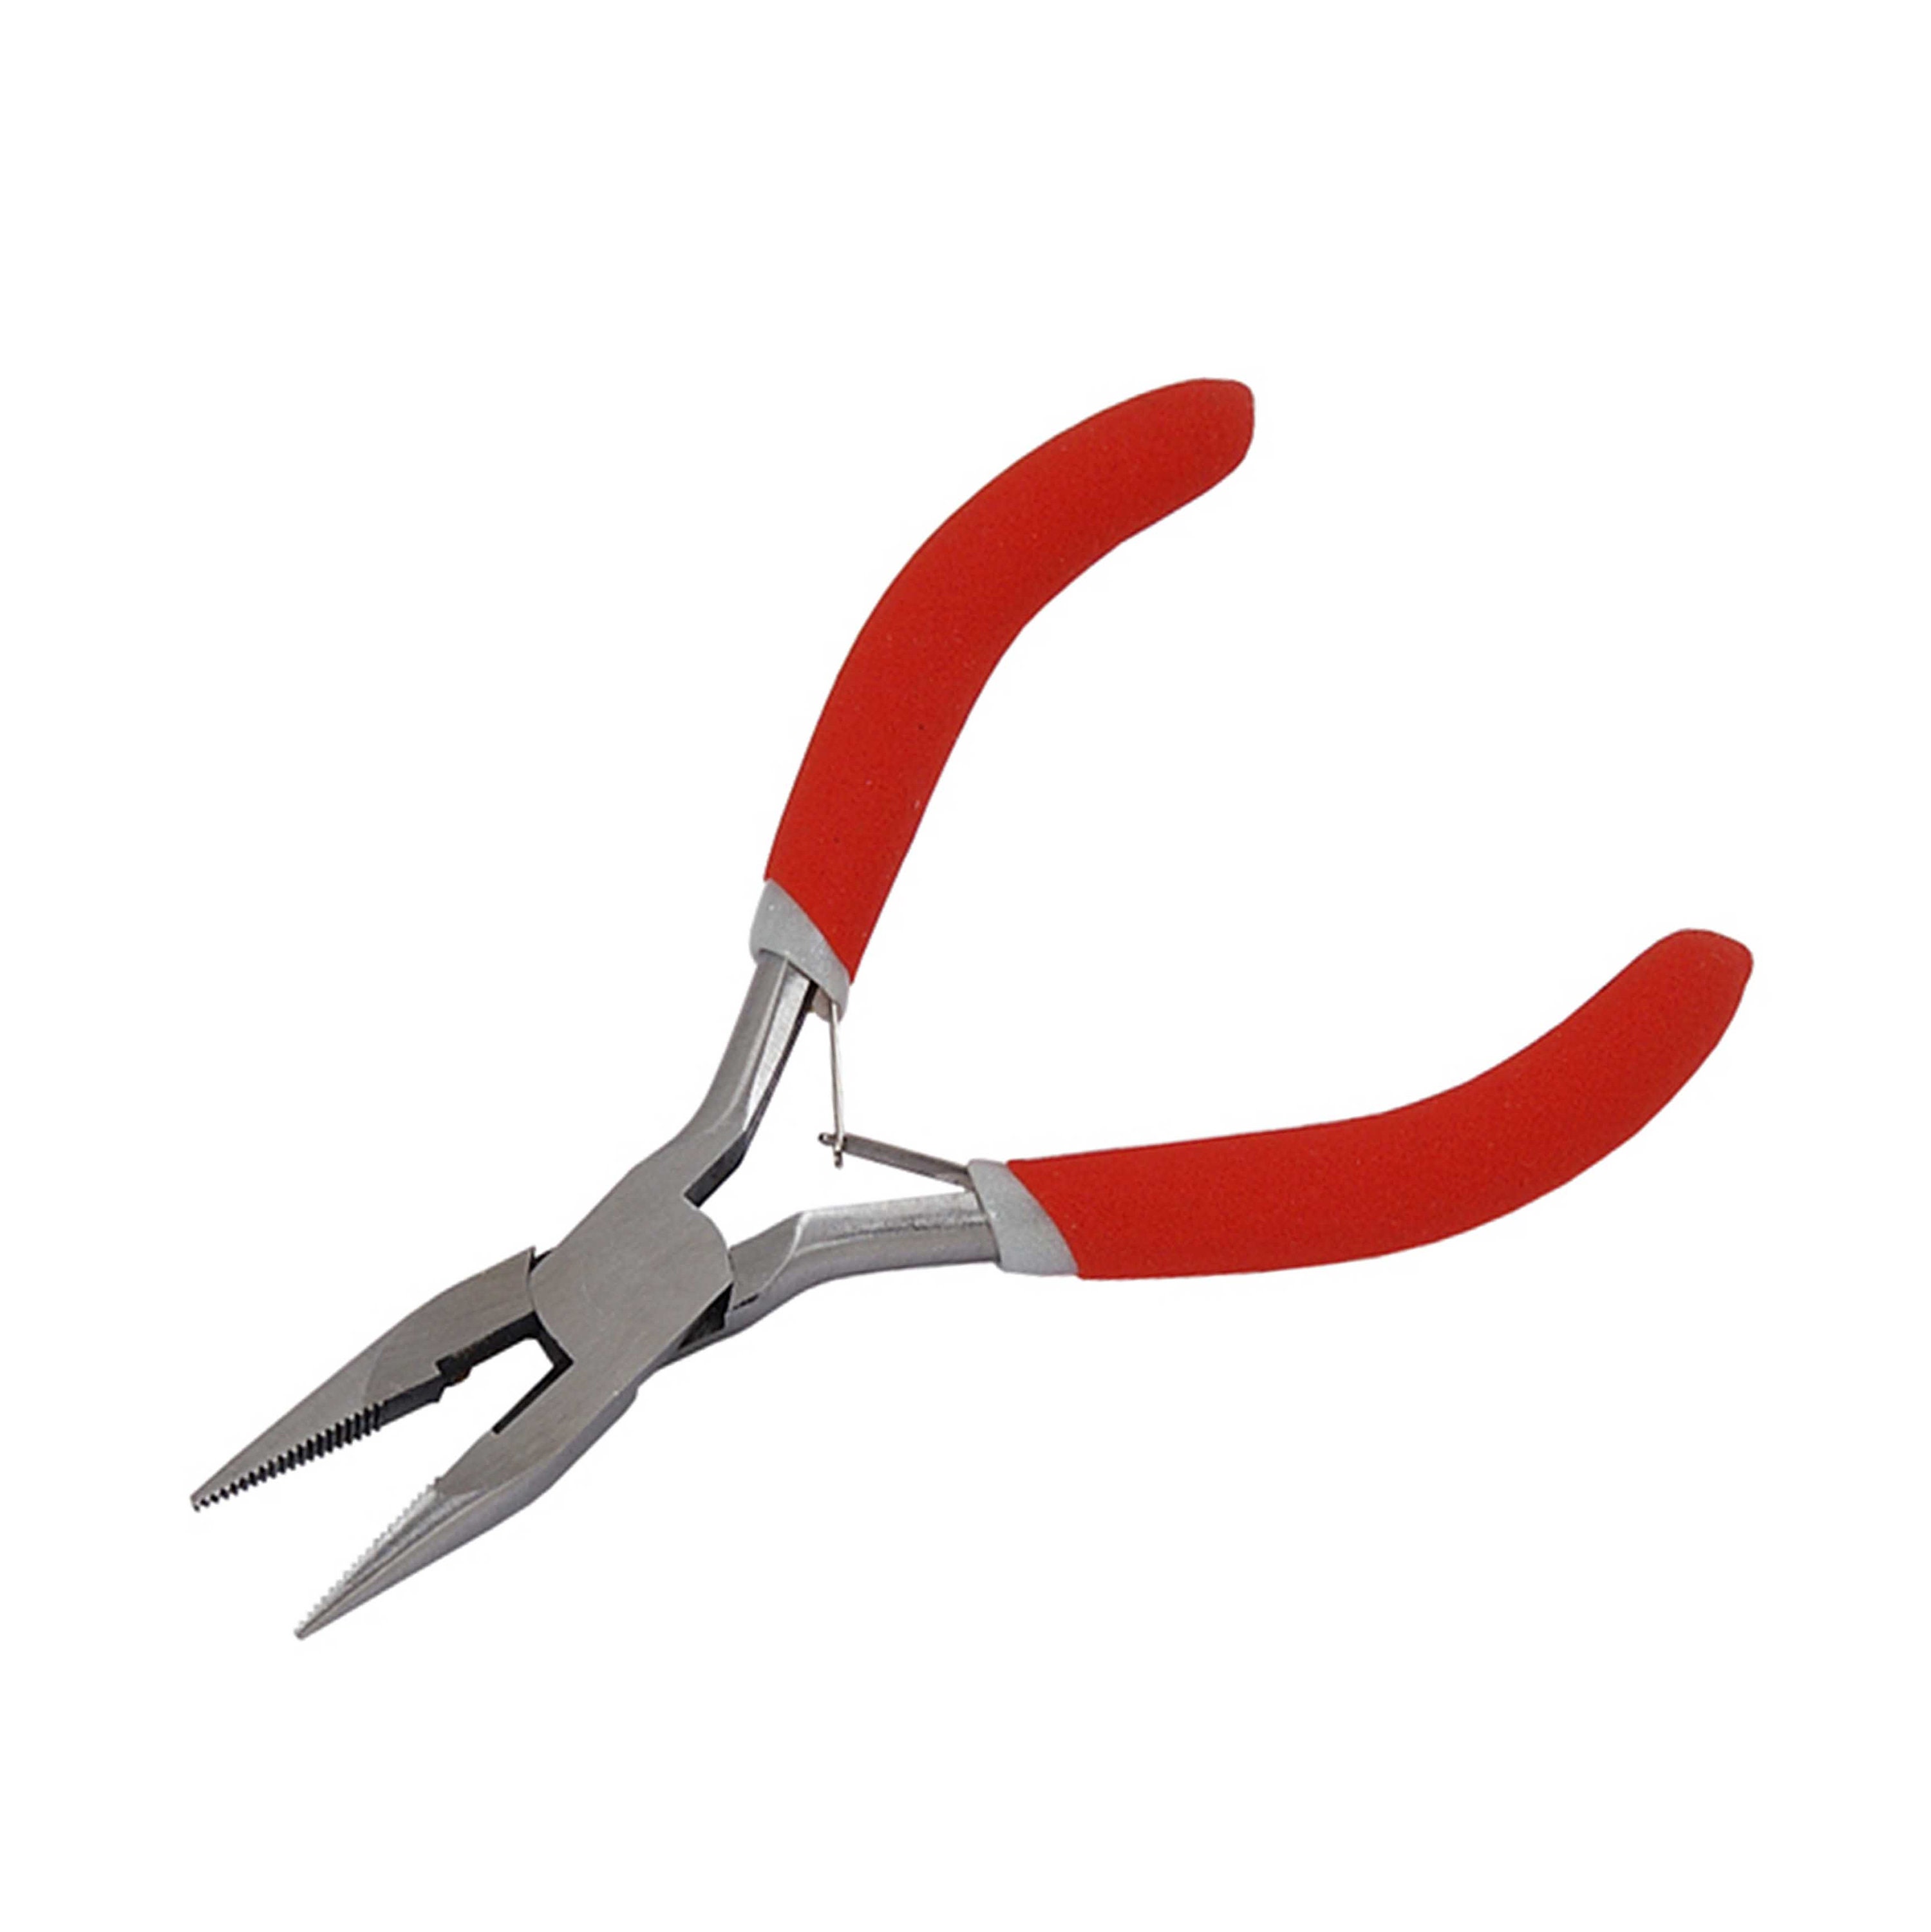 94mm Precision Mini Wire Snip Cutters for Gripping Splicing Cutting Wires  Stripping Insulation Craft Electrical Electronic Model Making Tool 